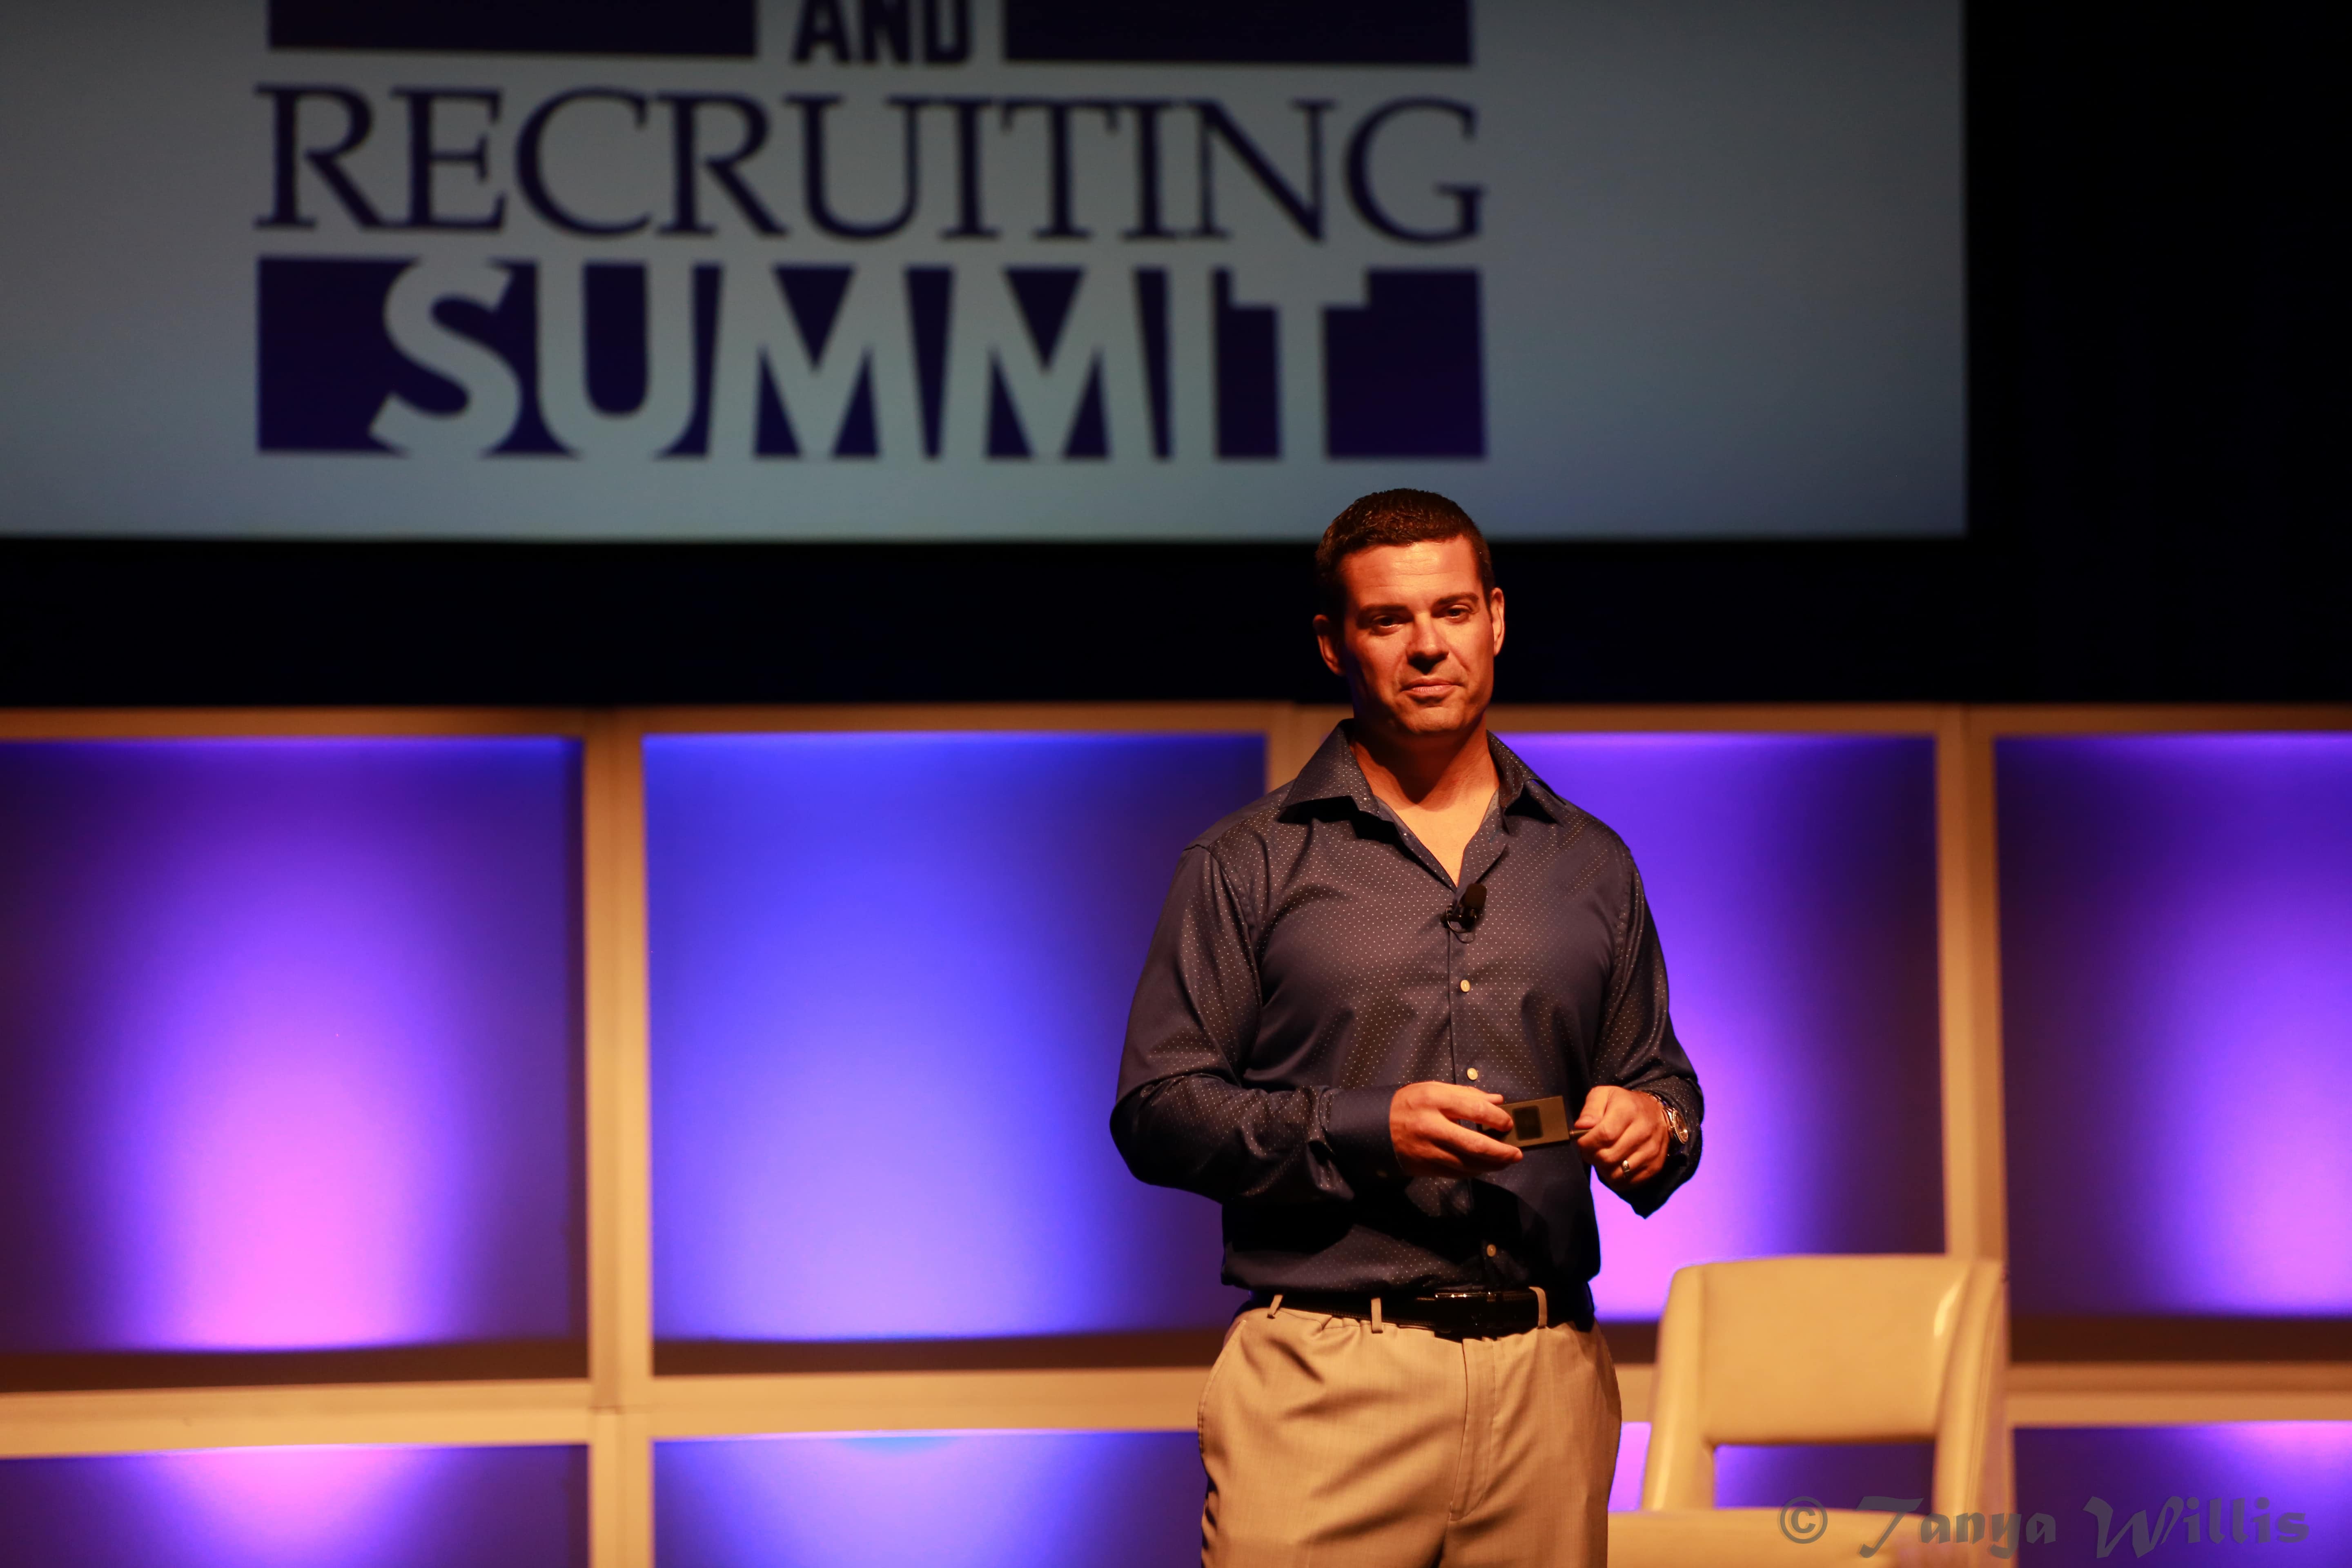 Some Notes from the Prospecting and Recruiting Summit